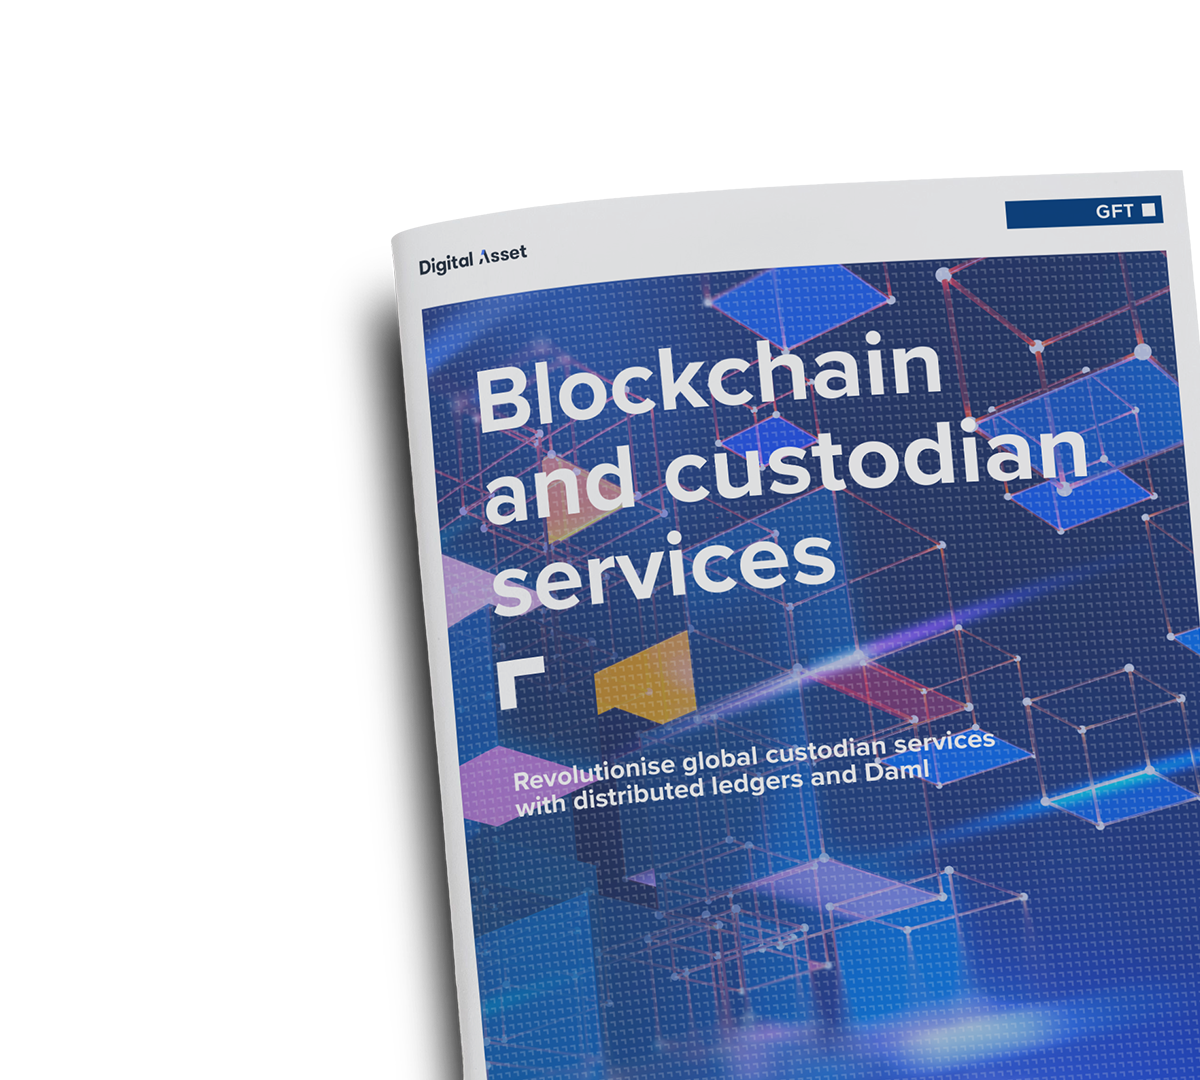 Thought leadership: Blockchain and custodian services